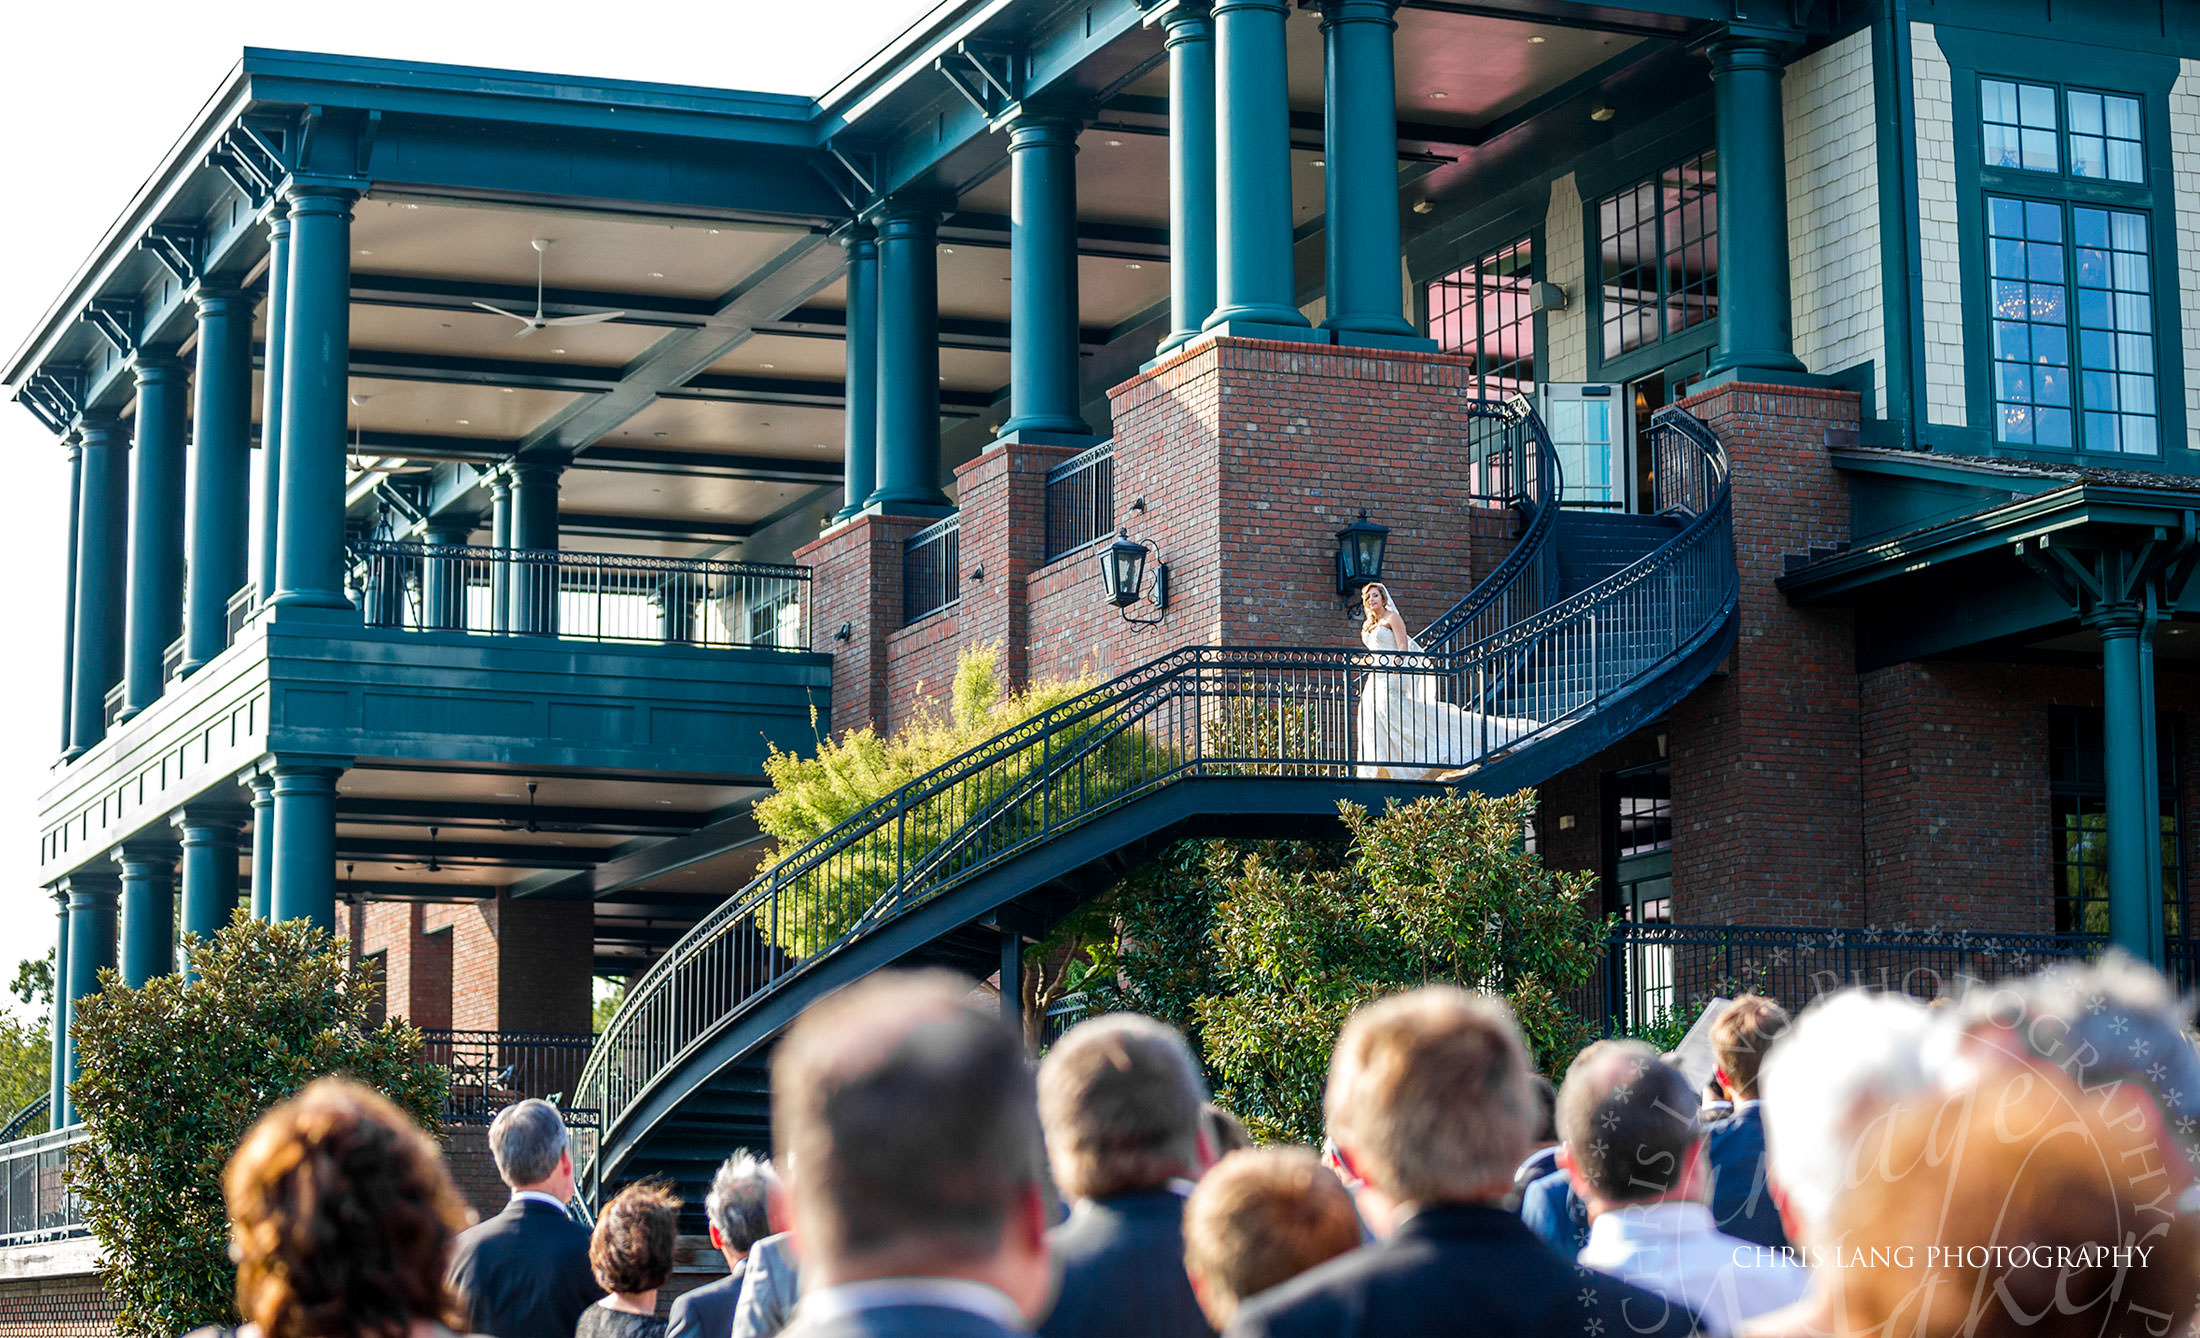 Lawn wedding at River Landing - Wallace NC - Image of Bride walking down the staircase entering the wedding ceremony on the lawn - Amazing Bridal Entrances